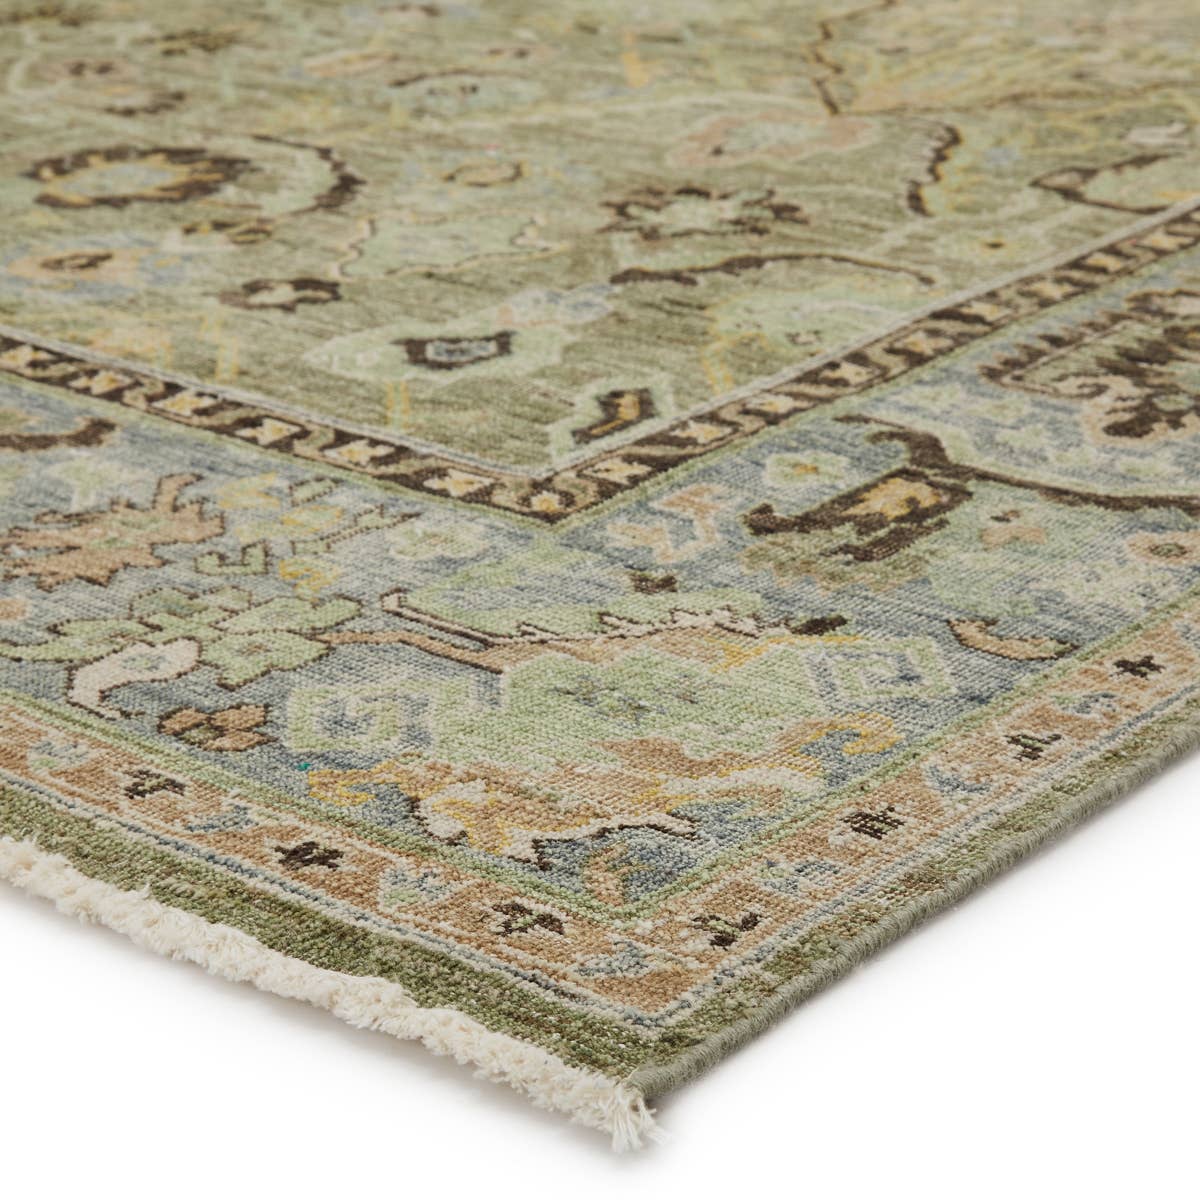 Jaipur Living Someplace In Time Resonant Rug